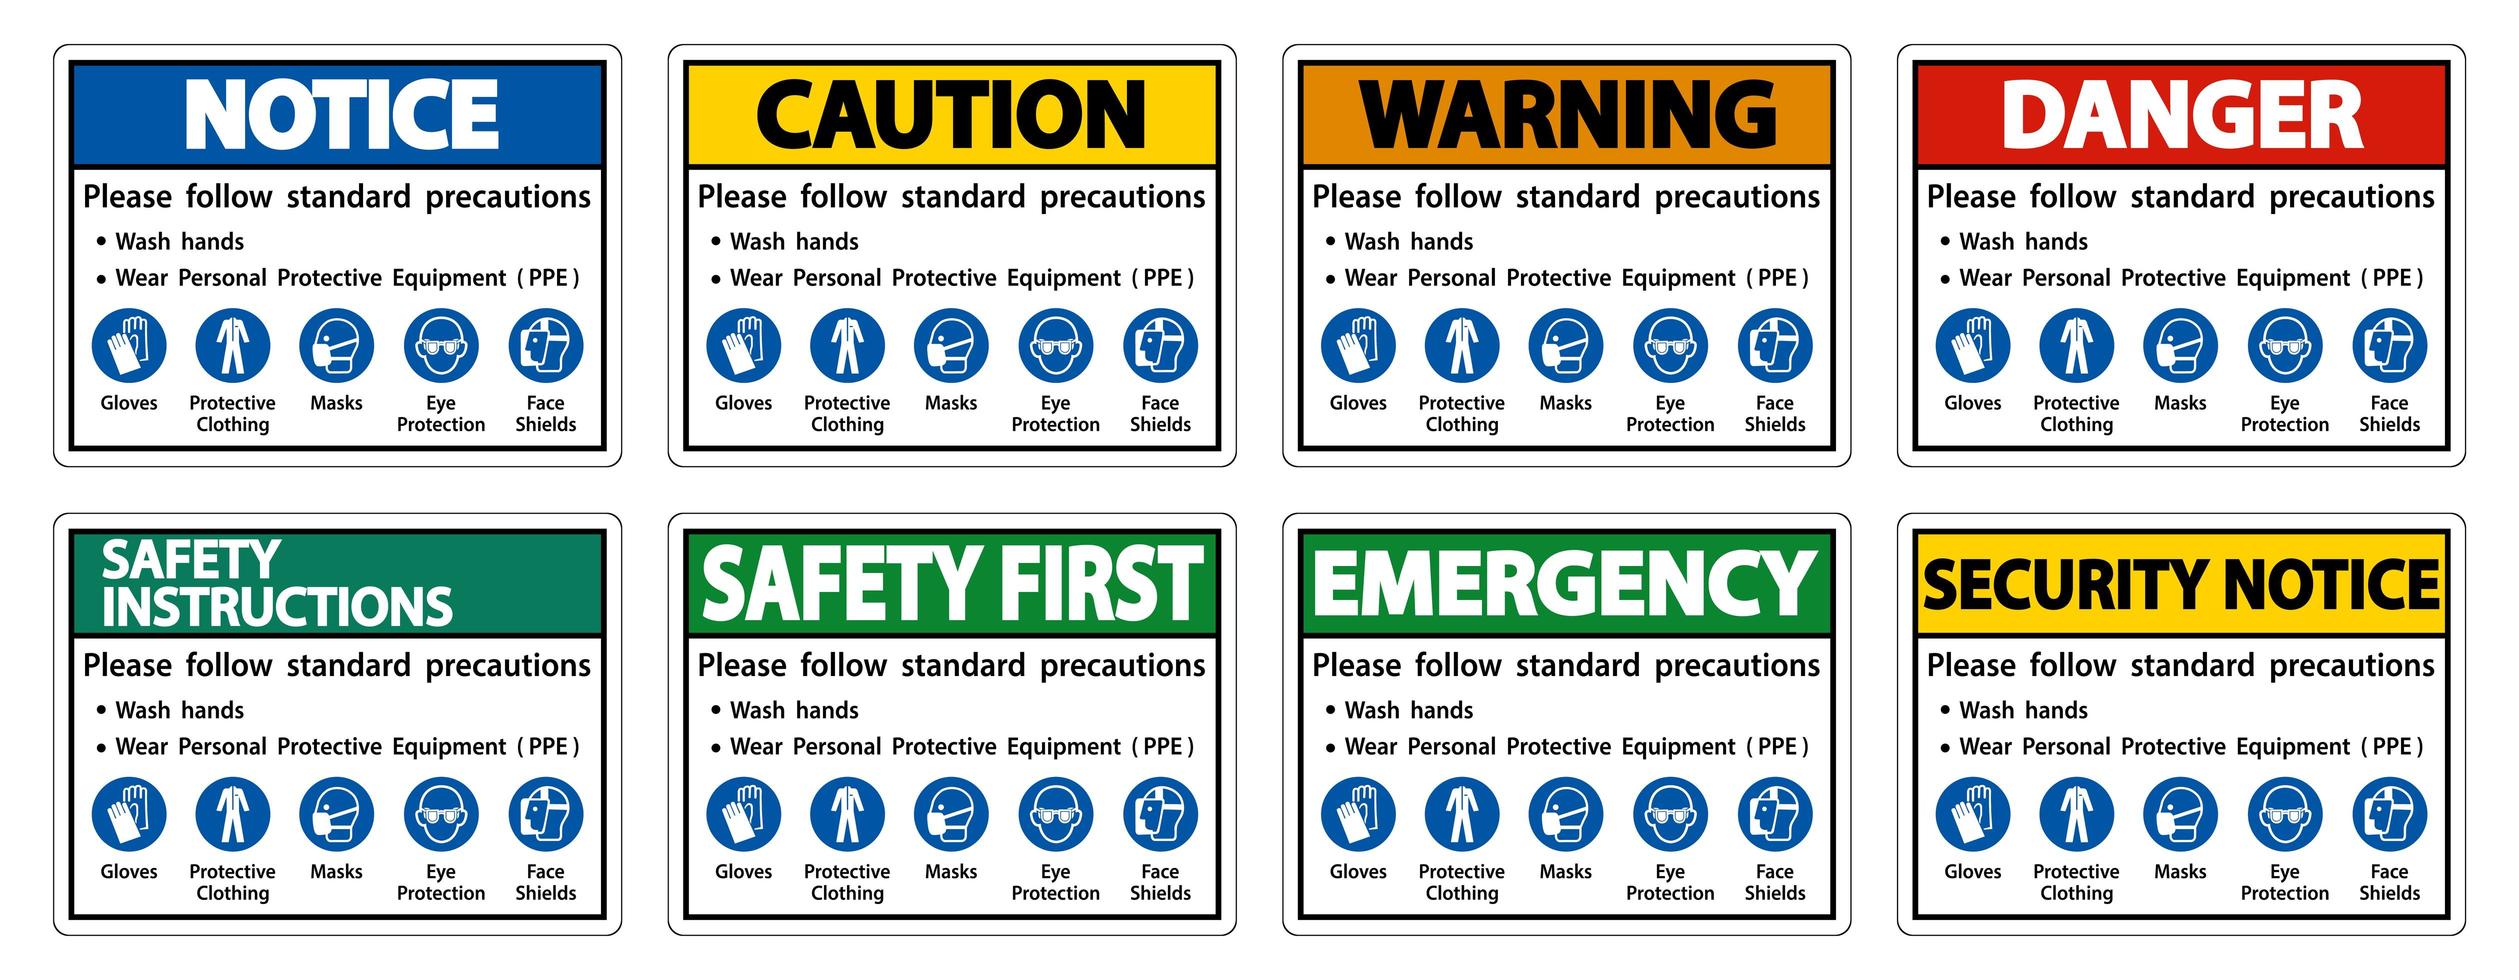 Follow standard hand washing and PPE precautions sign set vector